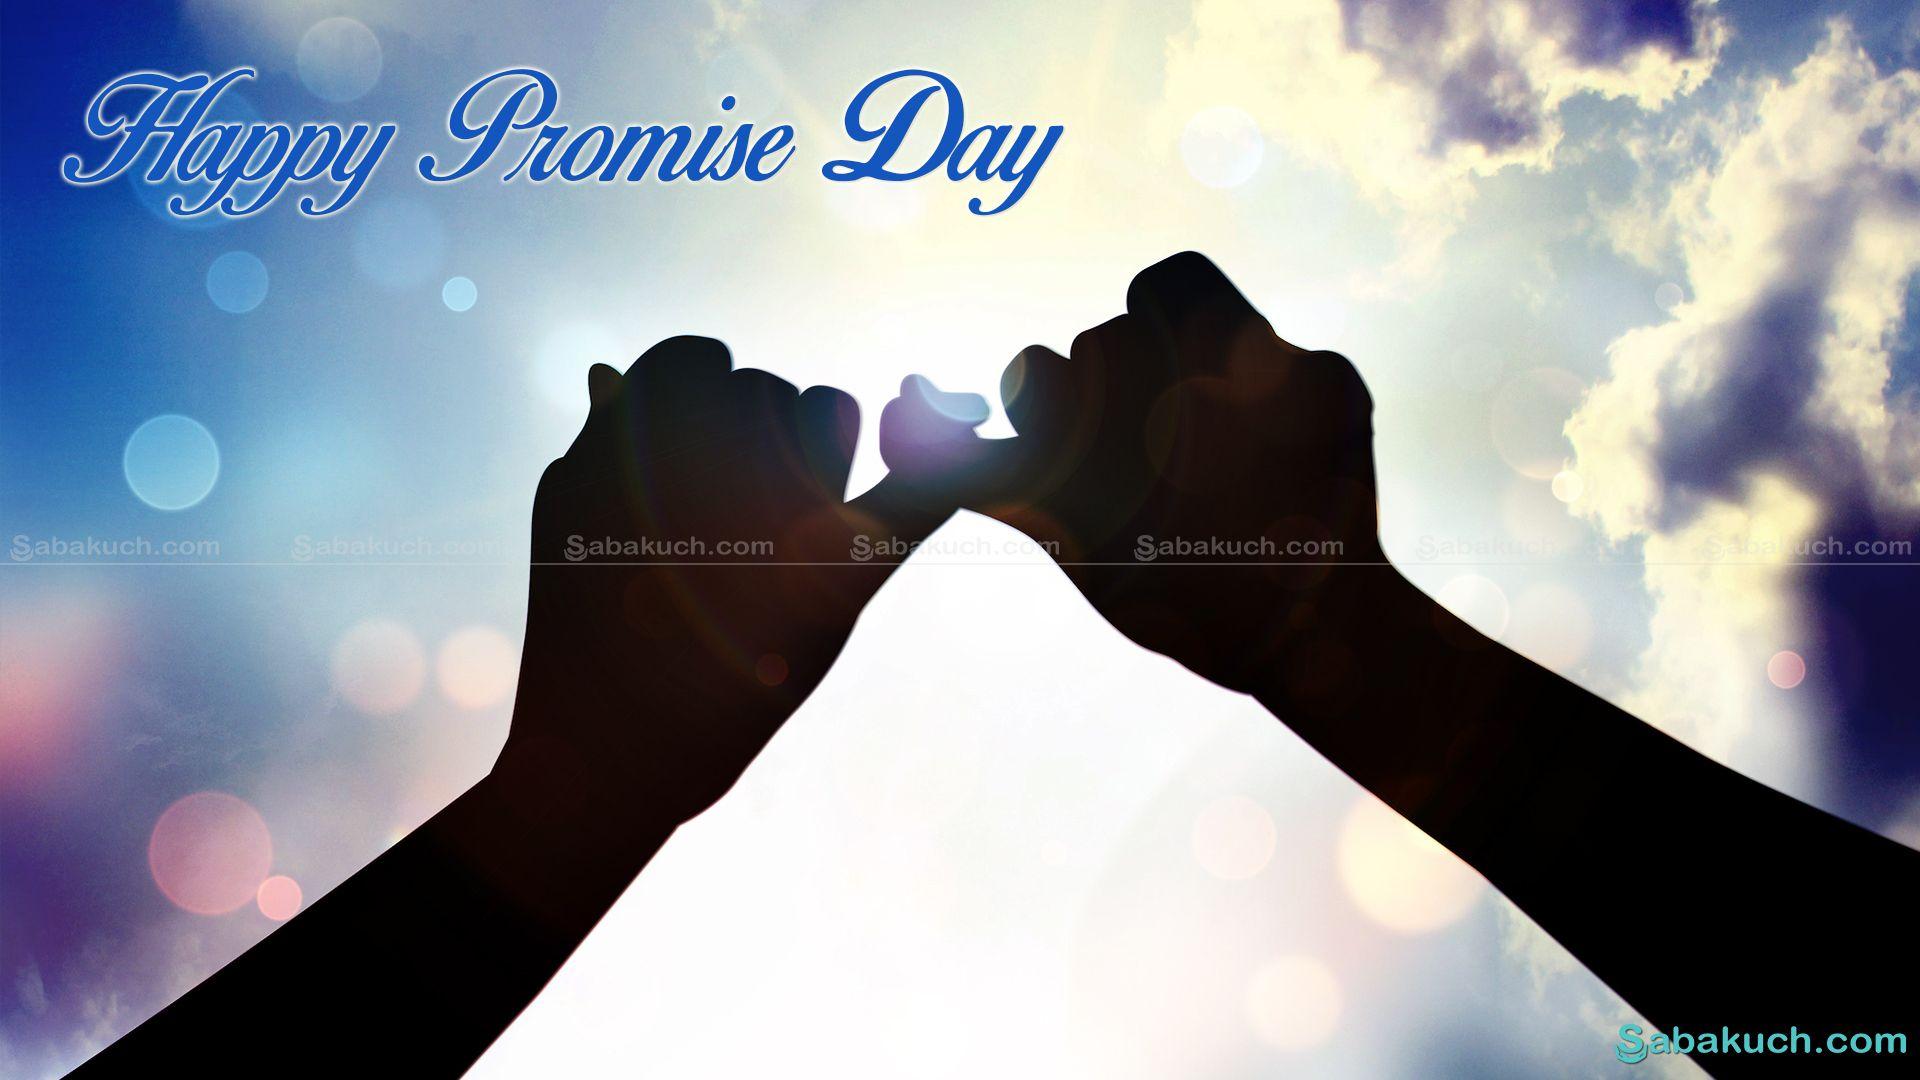 Happy Promise Day Quotes, Image, Wallpaper, Picture, Photo